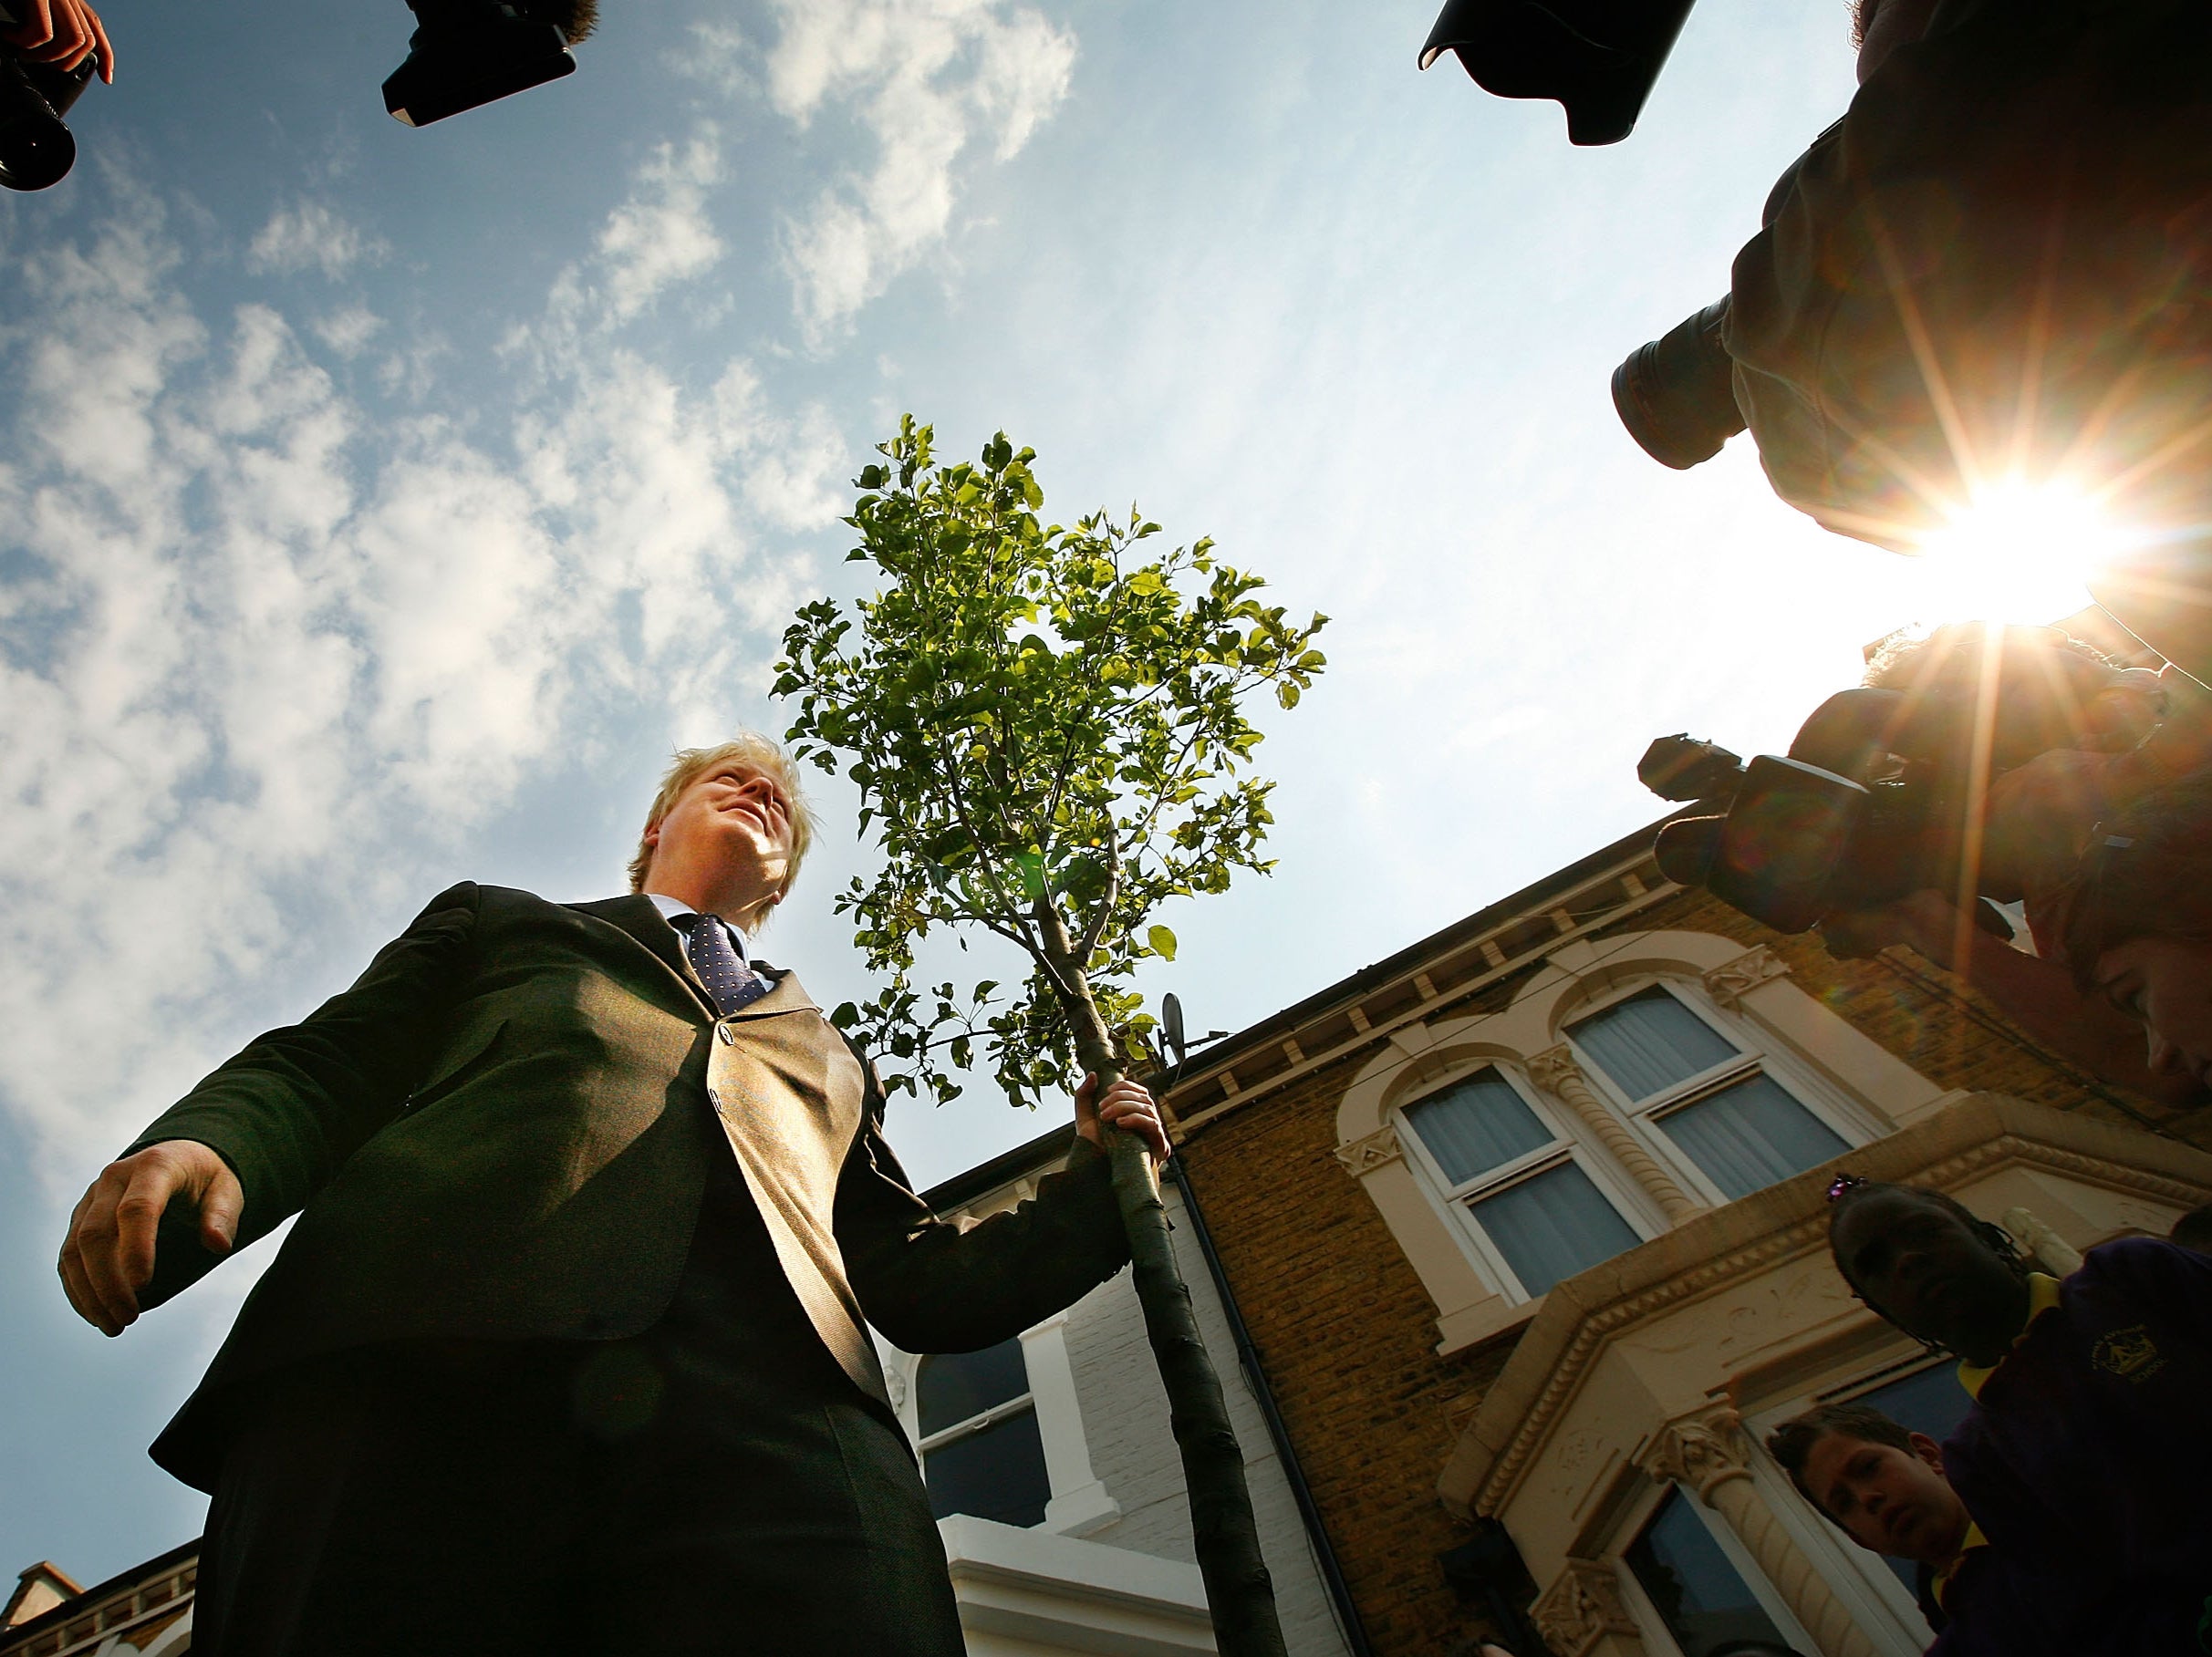 Boris Johnson stands beside a tree he planted in 2008, as part of an initiative during his tenure as London mayor